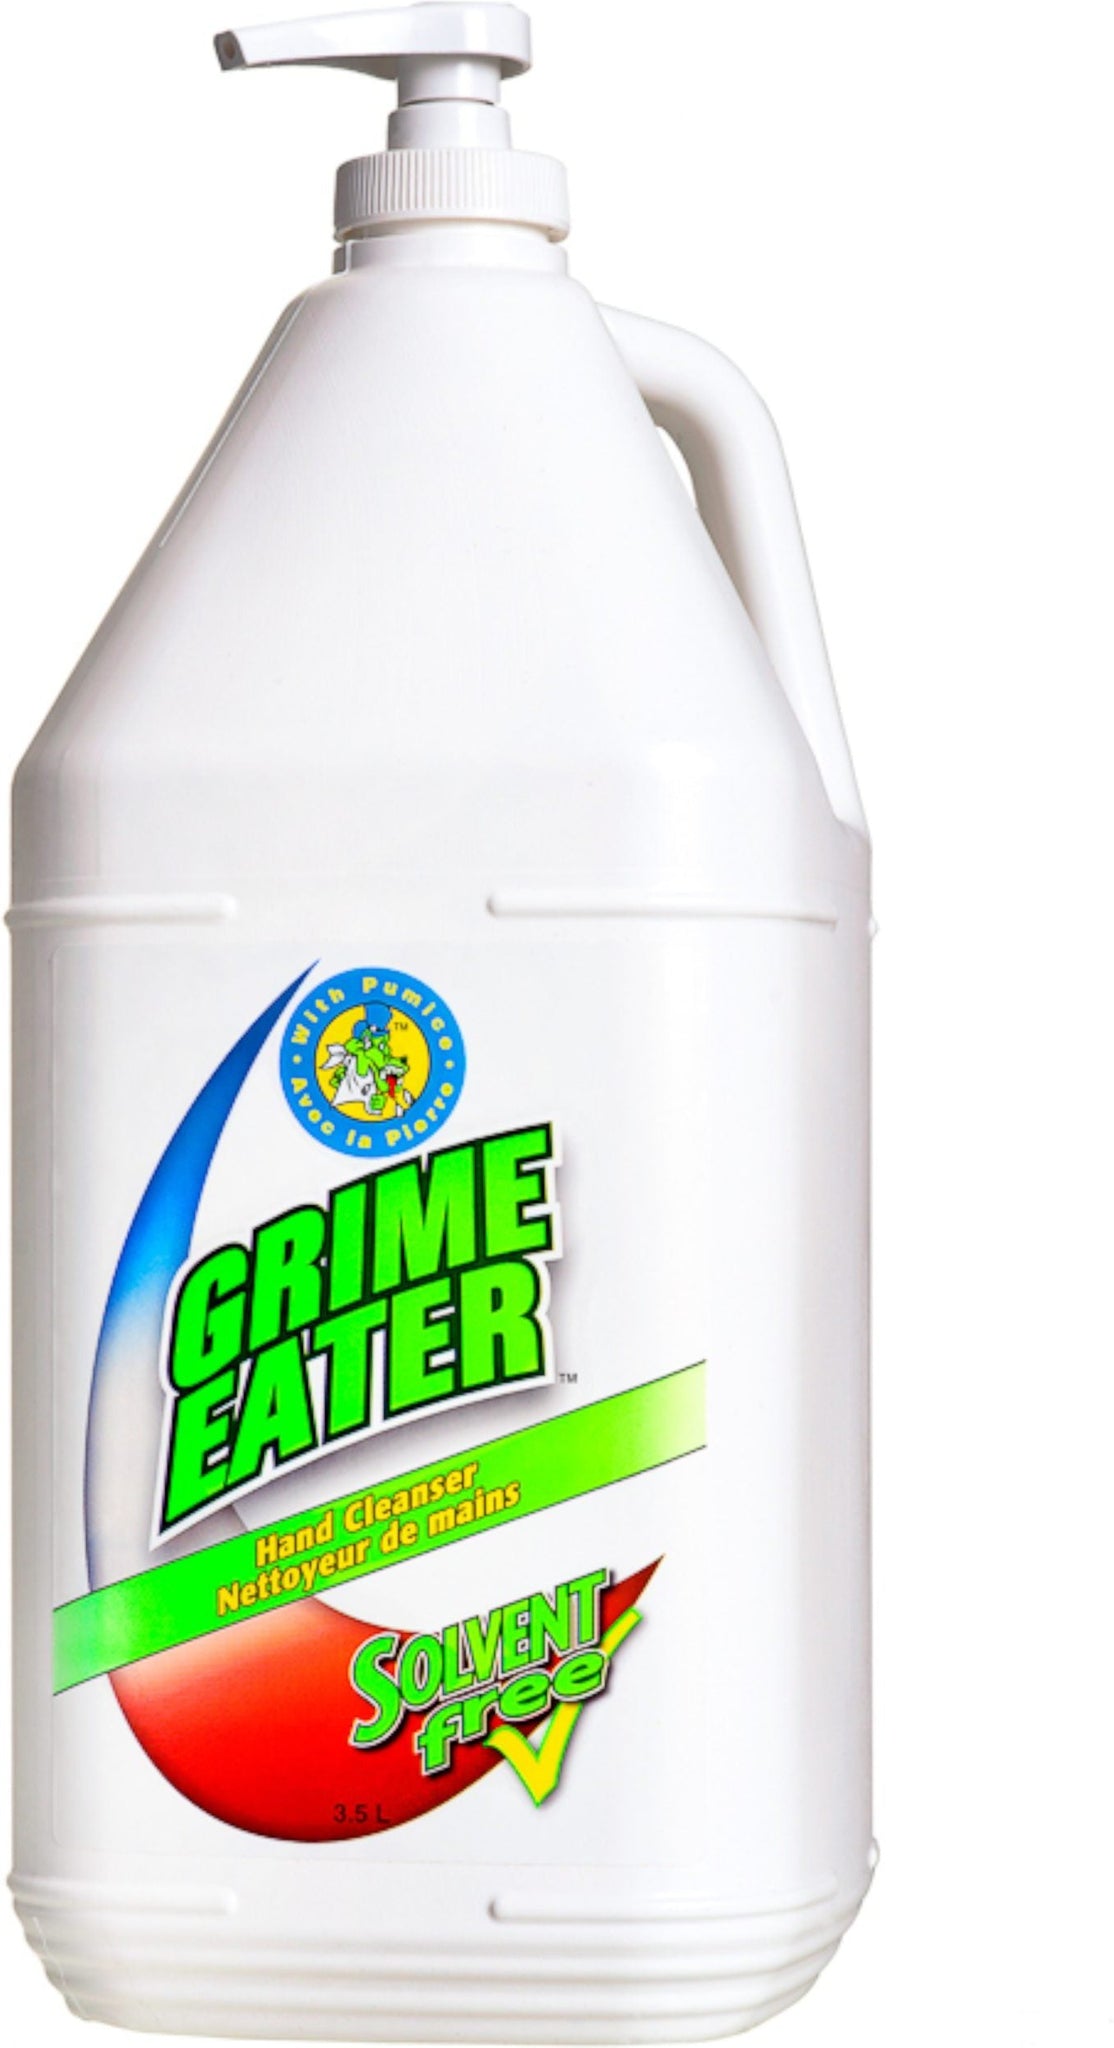 Grime Eater - 2 L Hand Cleaner Cartridge With Pumice Solvent Free, 4Btl/Cs - 43-70